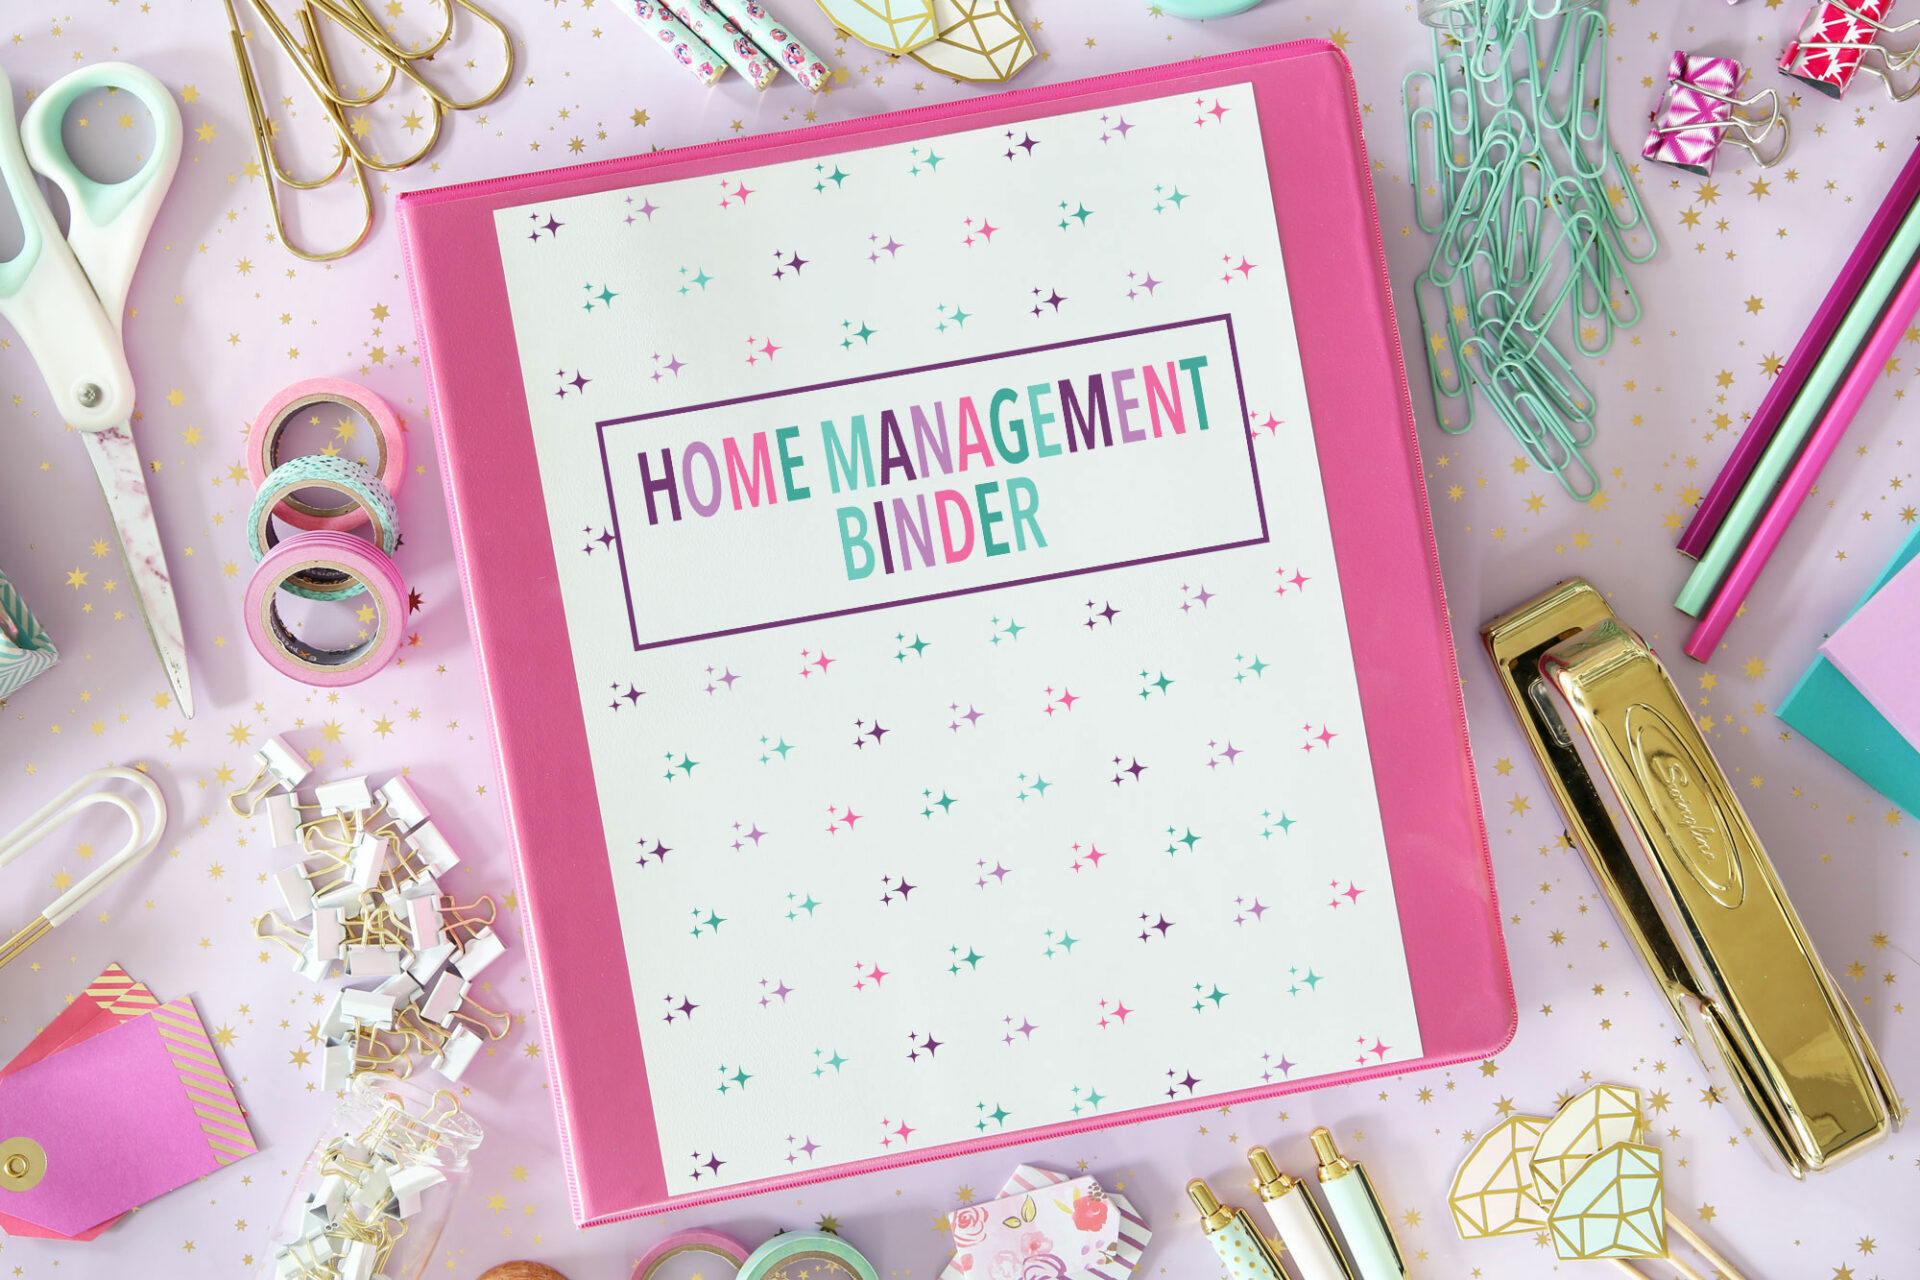 Free printable home management binder to organize your life